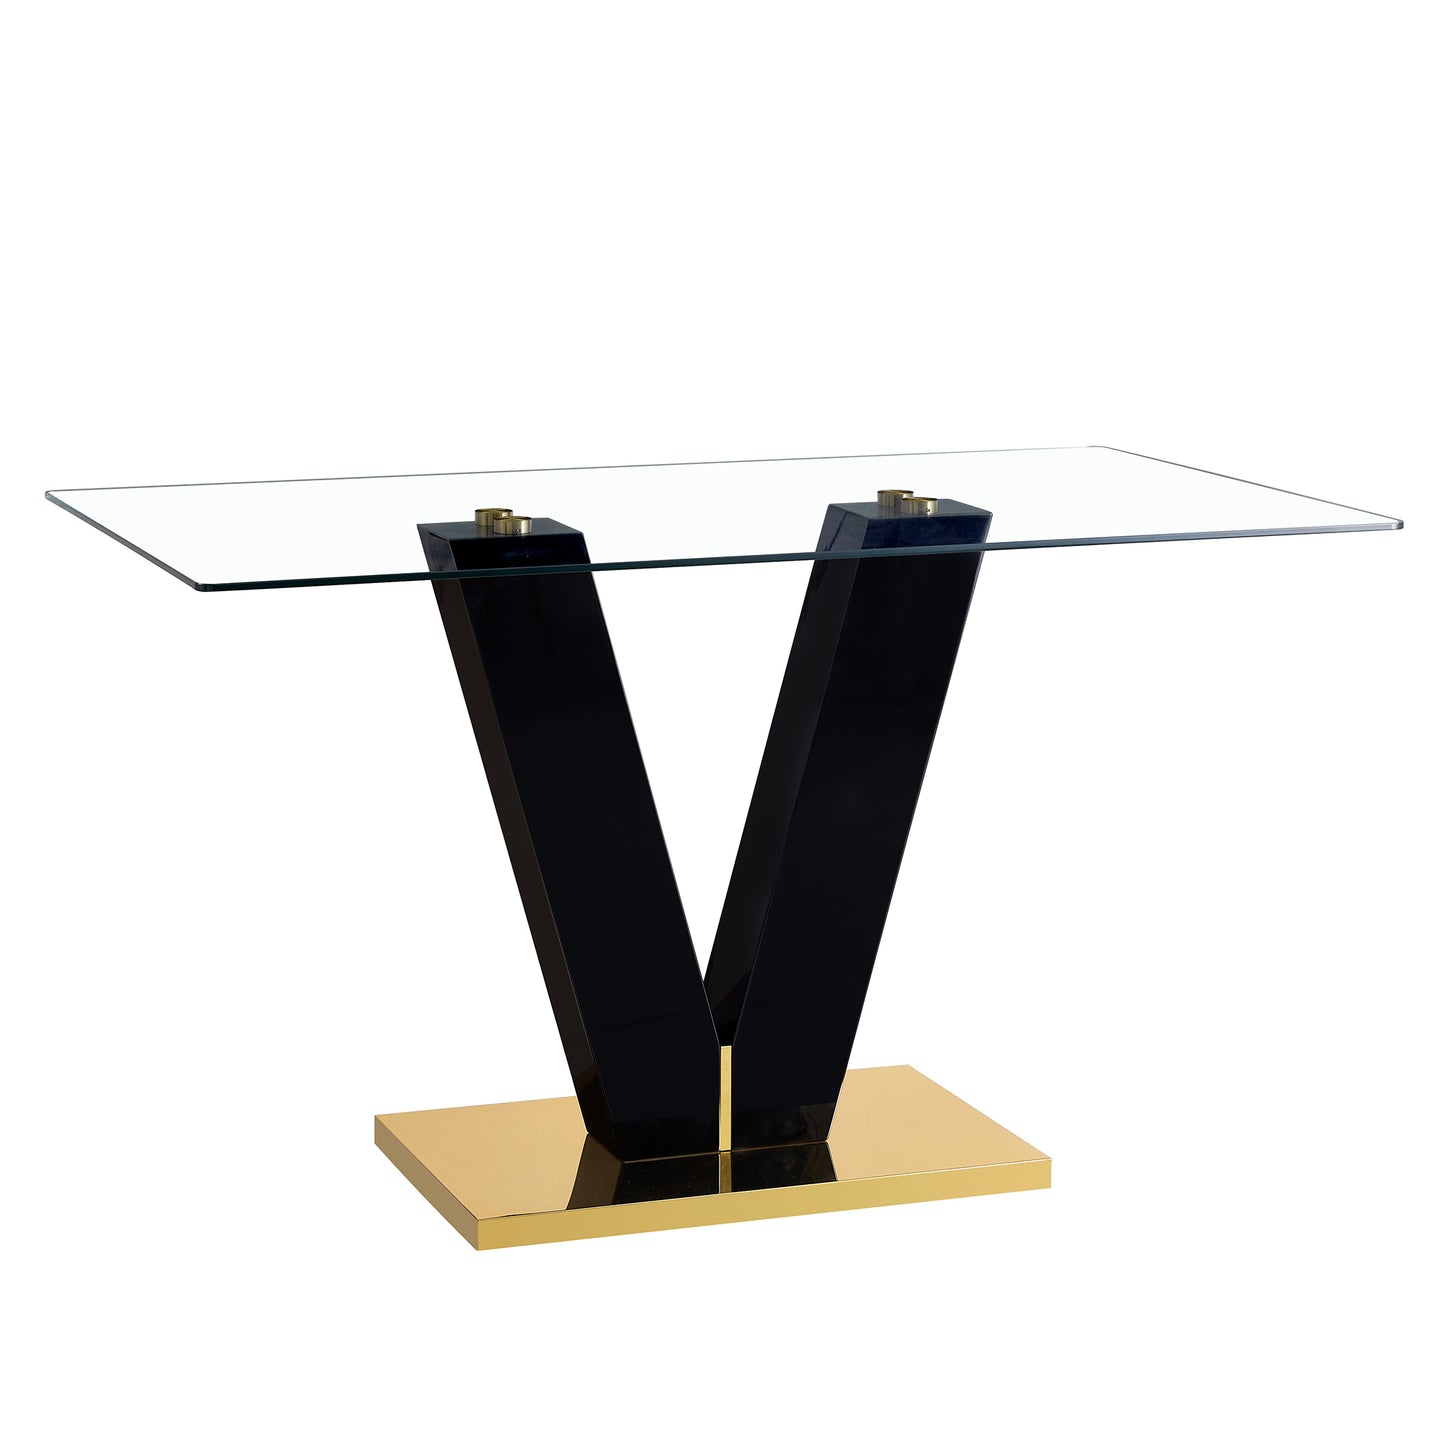 Large Modern Minimalist Rectangular Glass Dining Table for 6-8 with 0.39" Tempered Glass Tabletop and MDF slab V-Shaped Bracket, For Kitchen Dining Living Meeting Room Banquet Hall